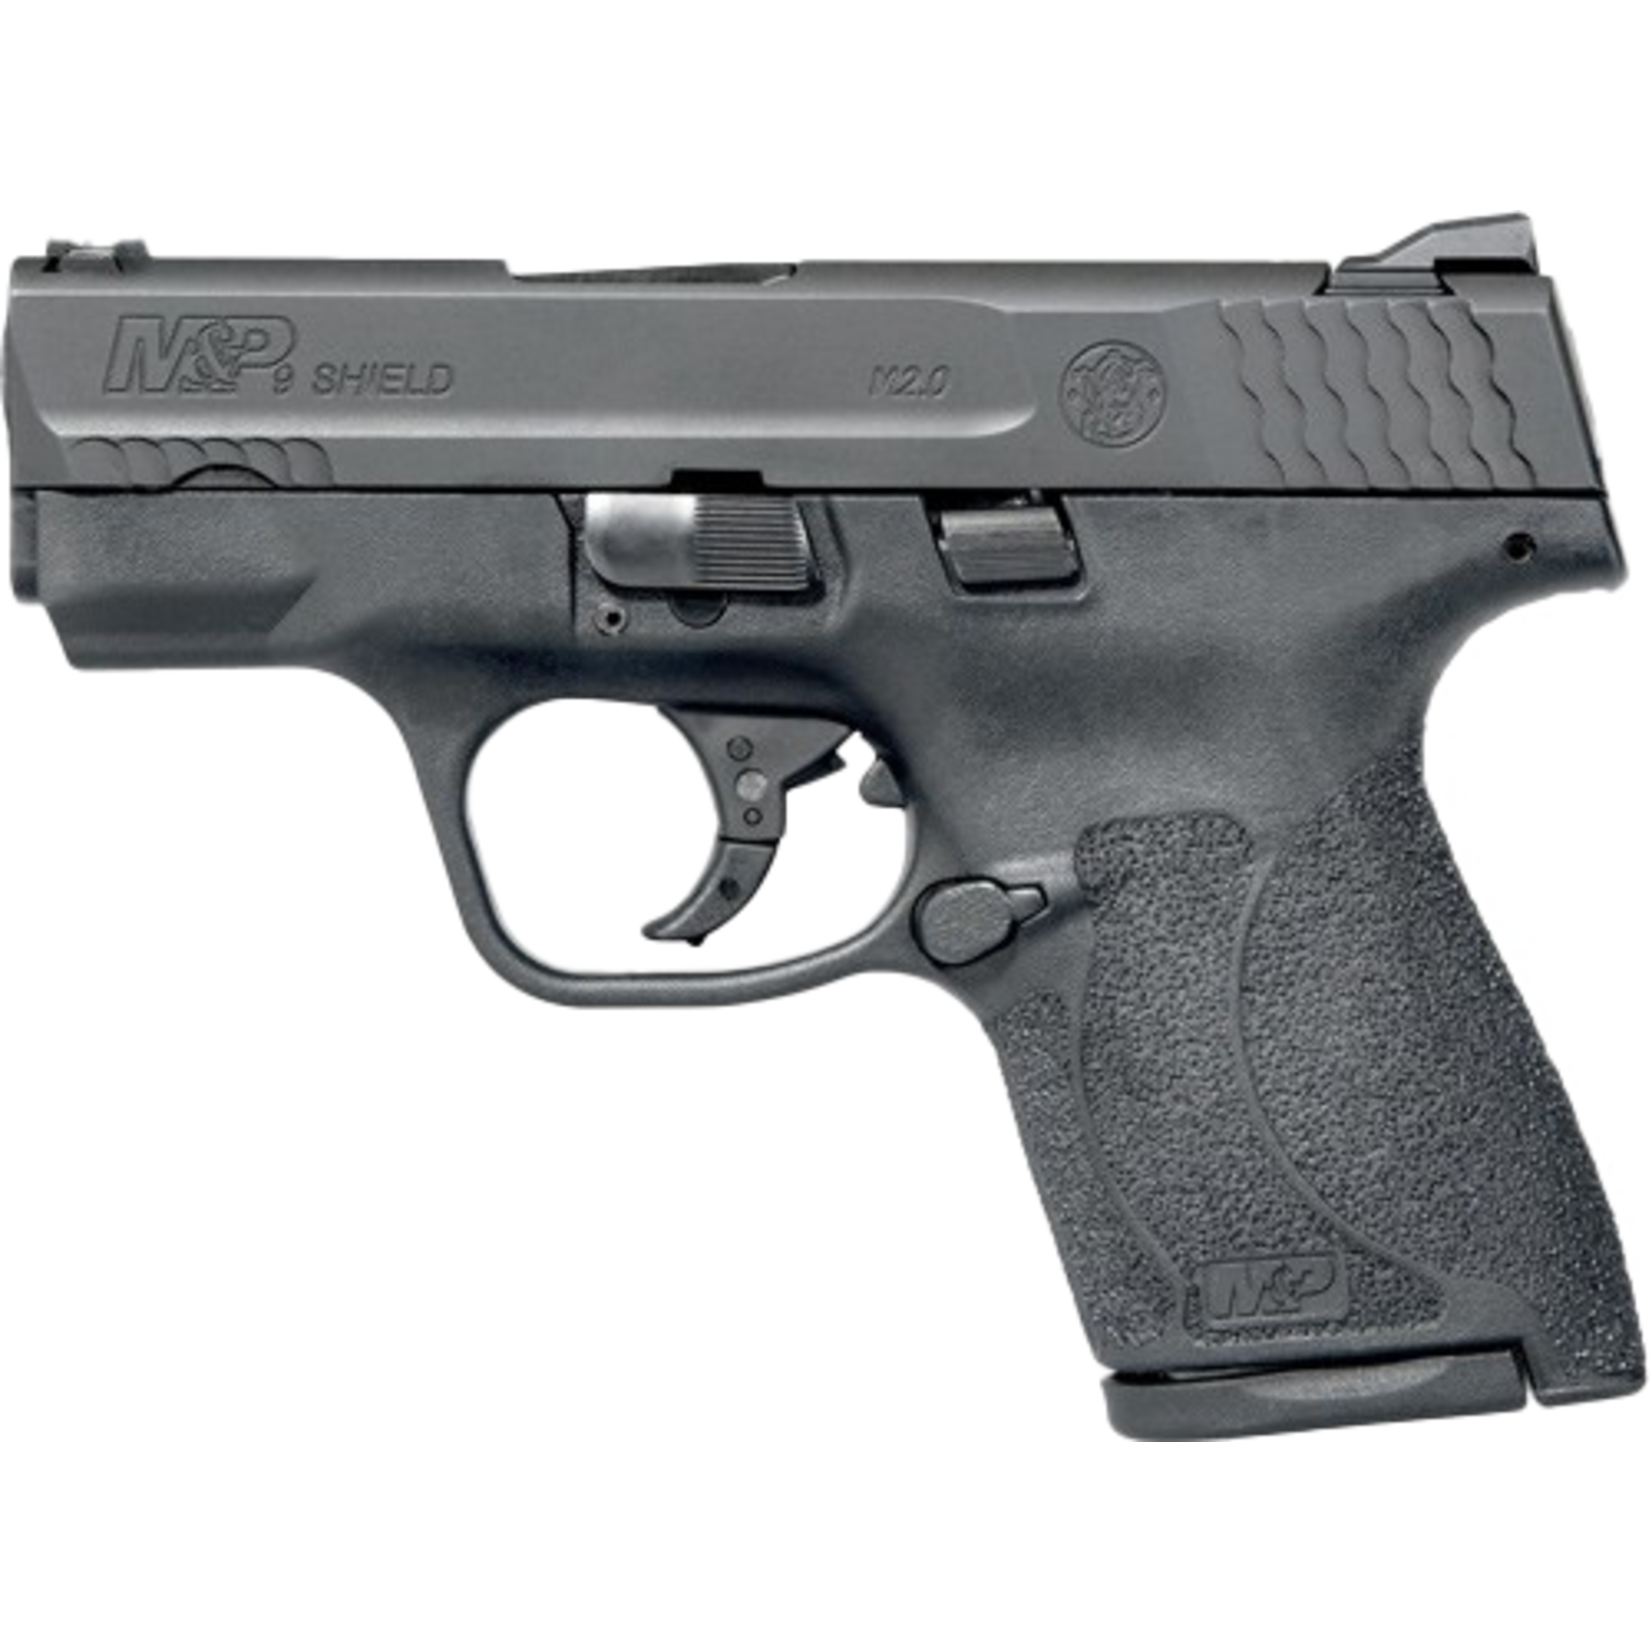 Smith and Wesson S&W SHIELD M2.0 M&P9 9MM NIGHT SIGHT NO THUMB SAFETY BLK!